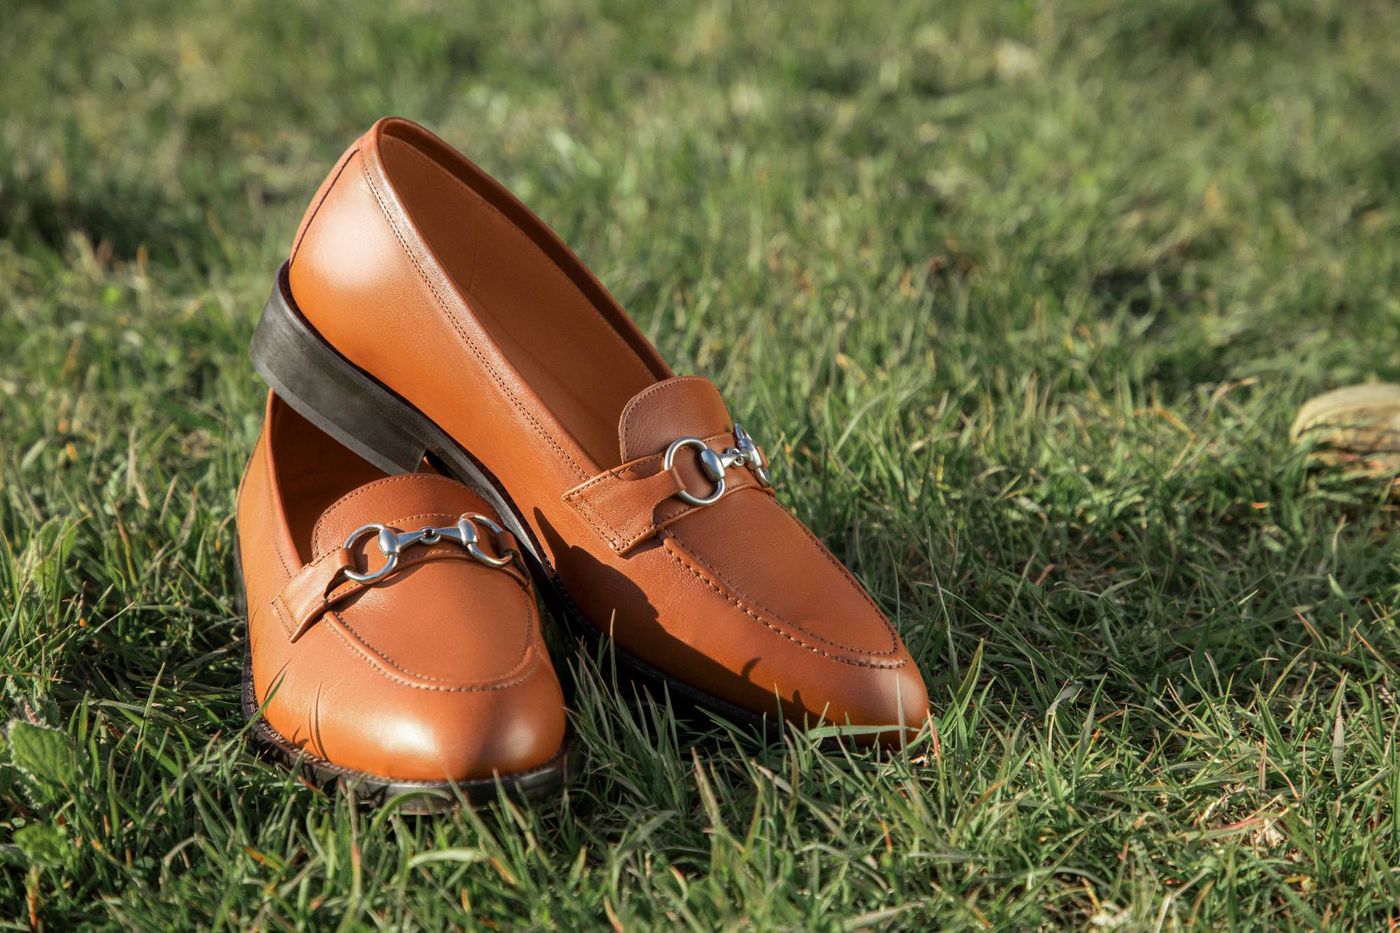 All about Loafers: What are loafers and which type should you wear